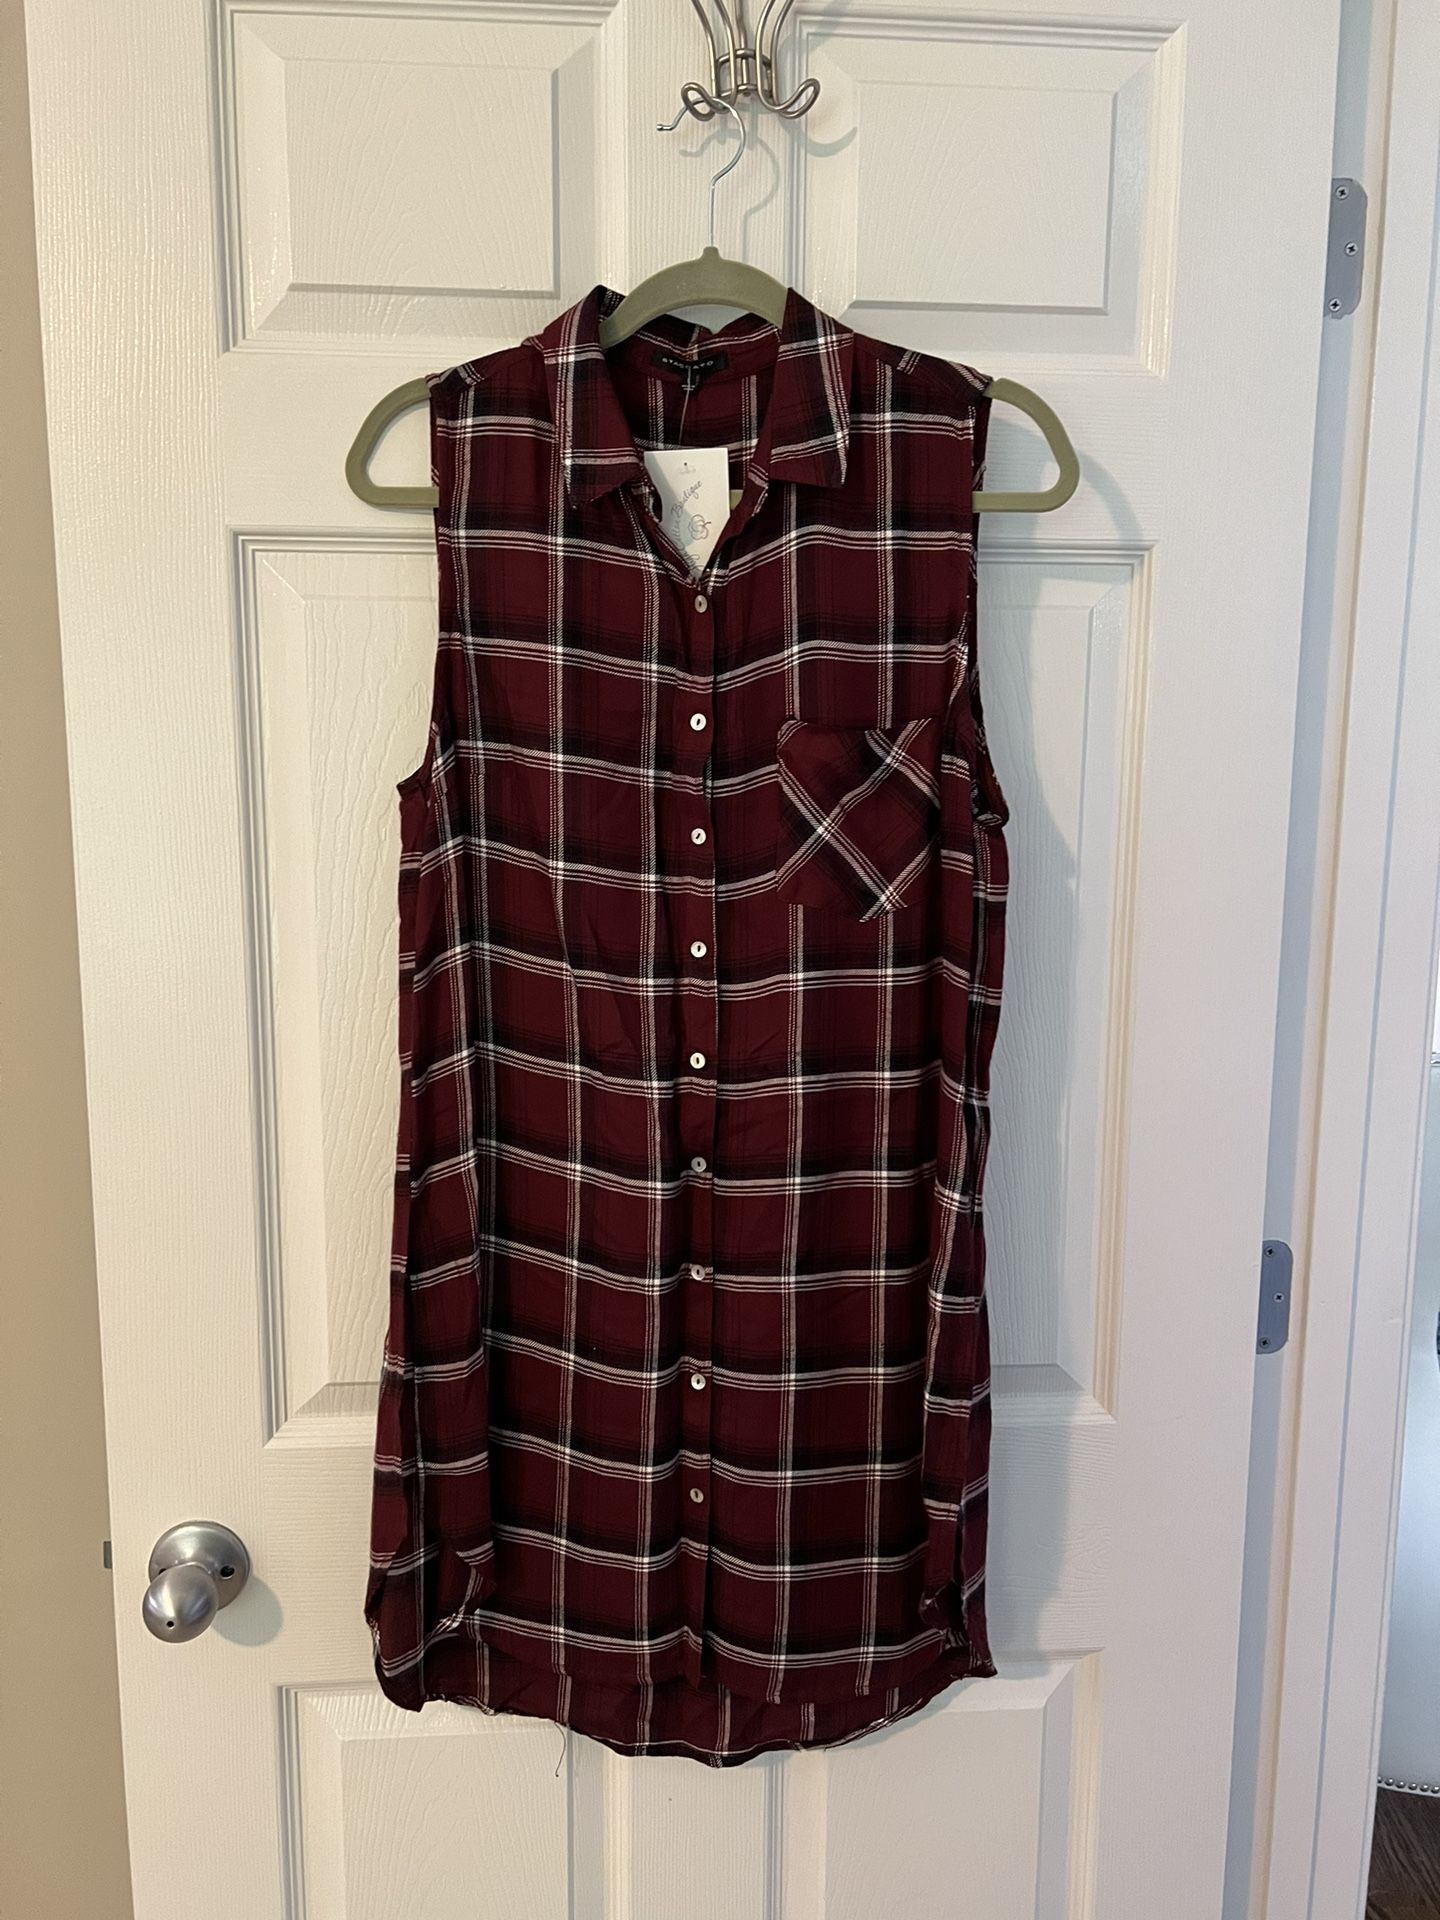 NWT Staccato Burgundy Black Plaid Top Button Shirt Dress Sleeveless Darts Pocket   Mother of pearl buttons  I thought this was a dress when I bought i